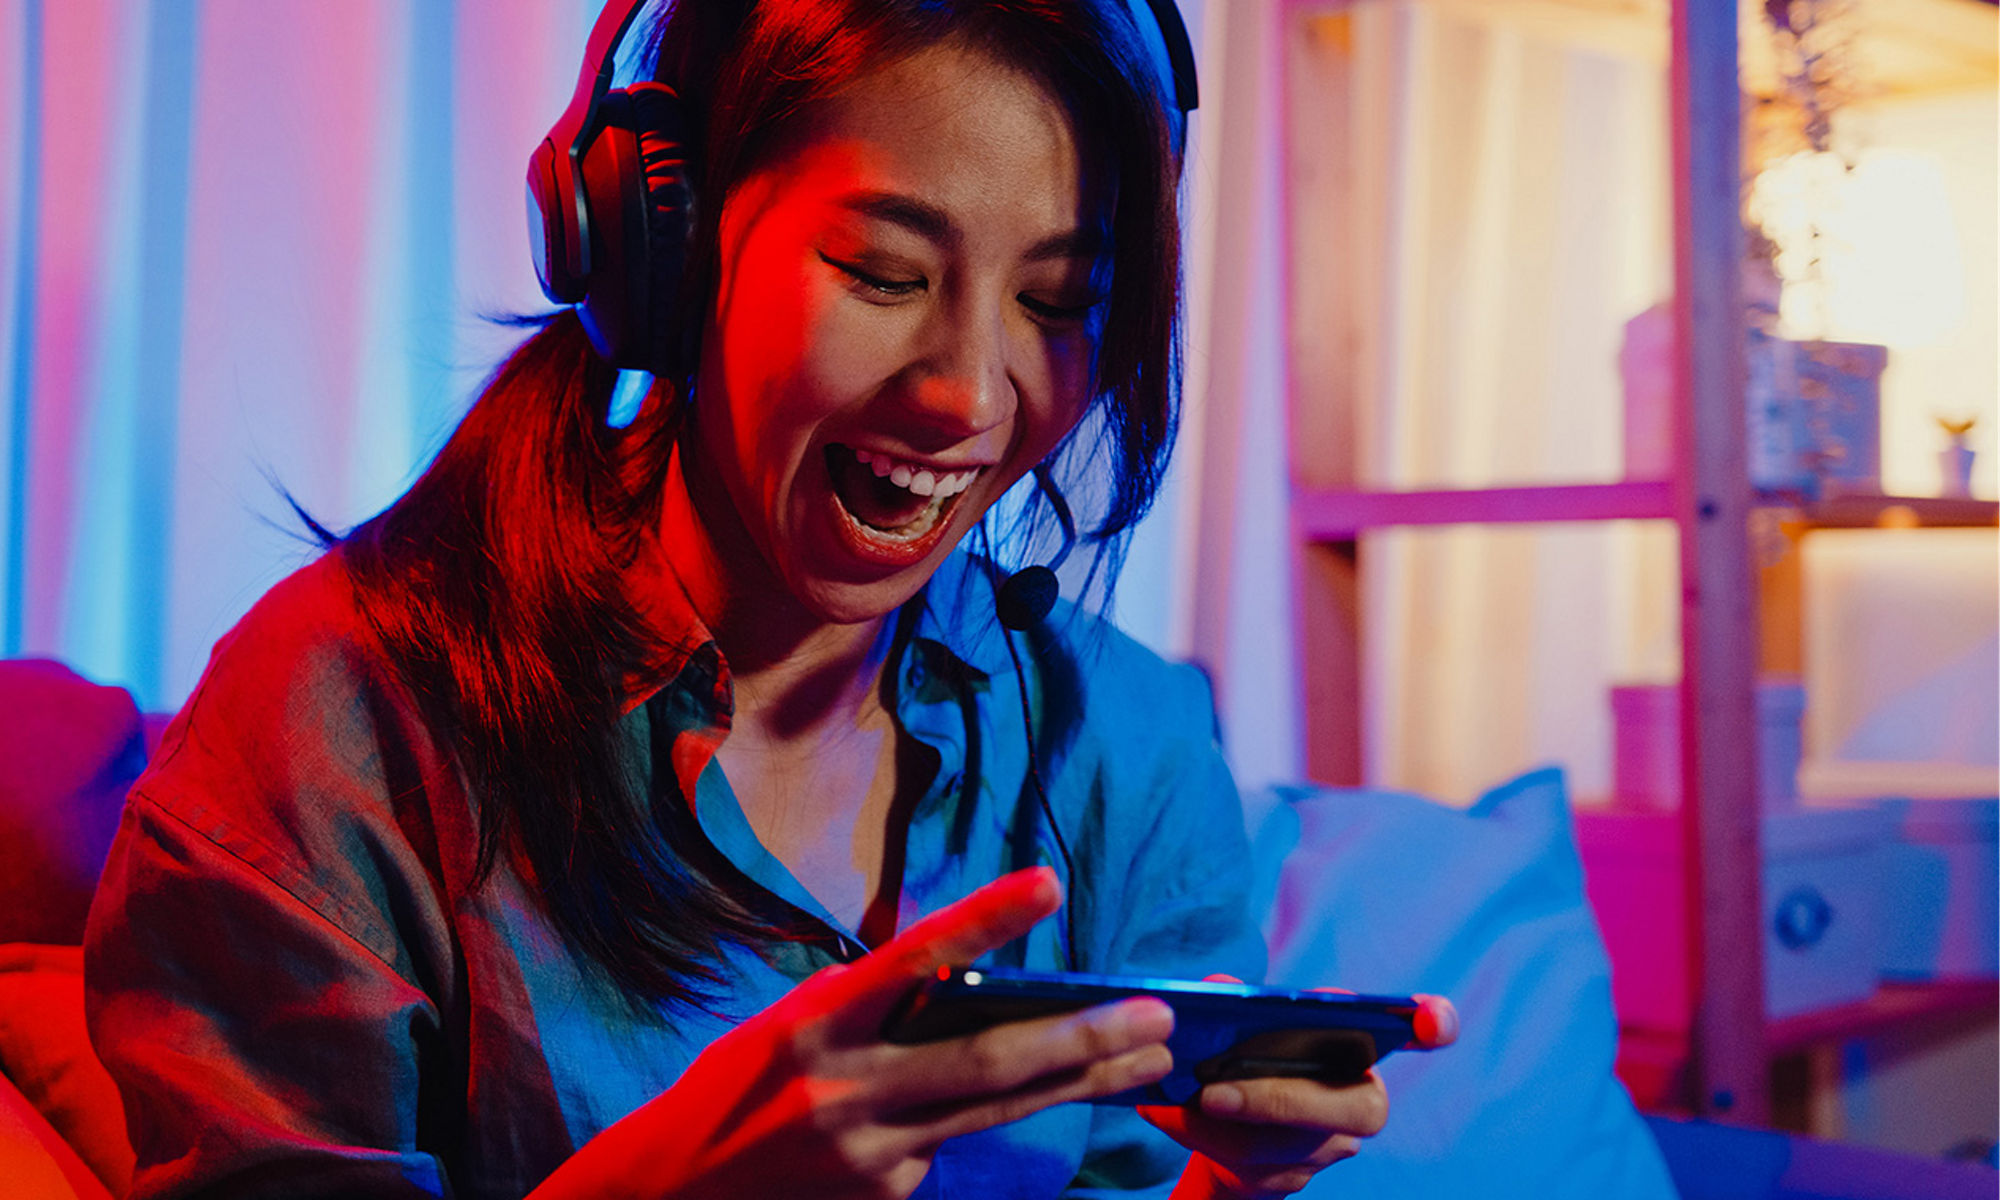 Female wearing headphones and looking down excitedly at a device she is holding